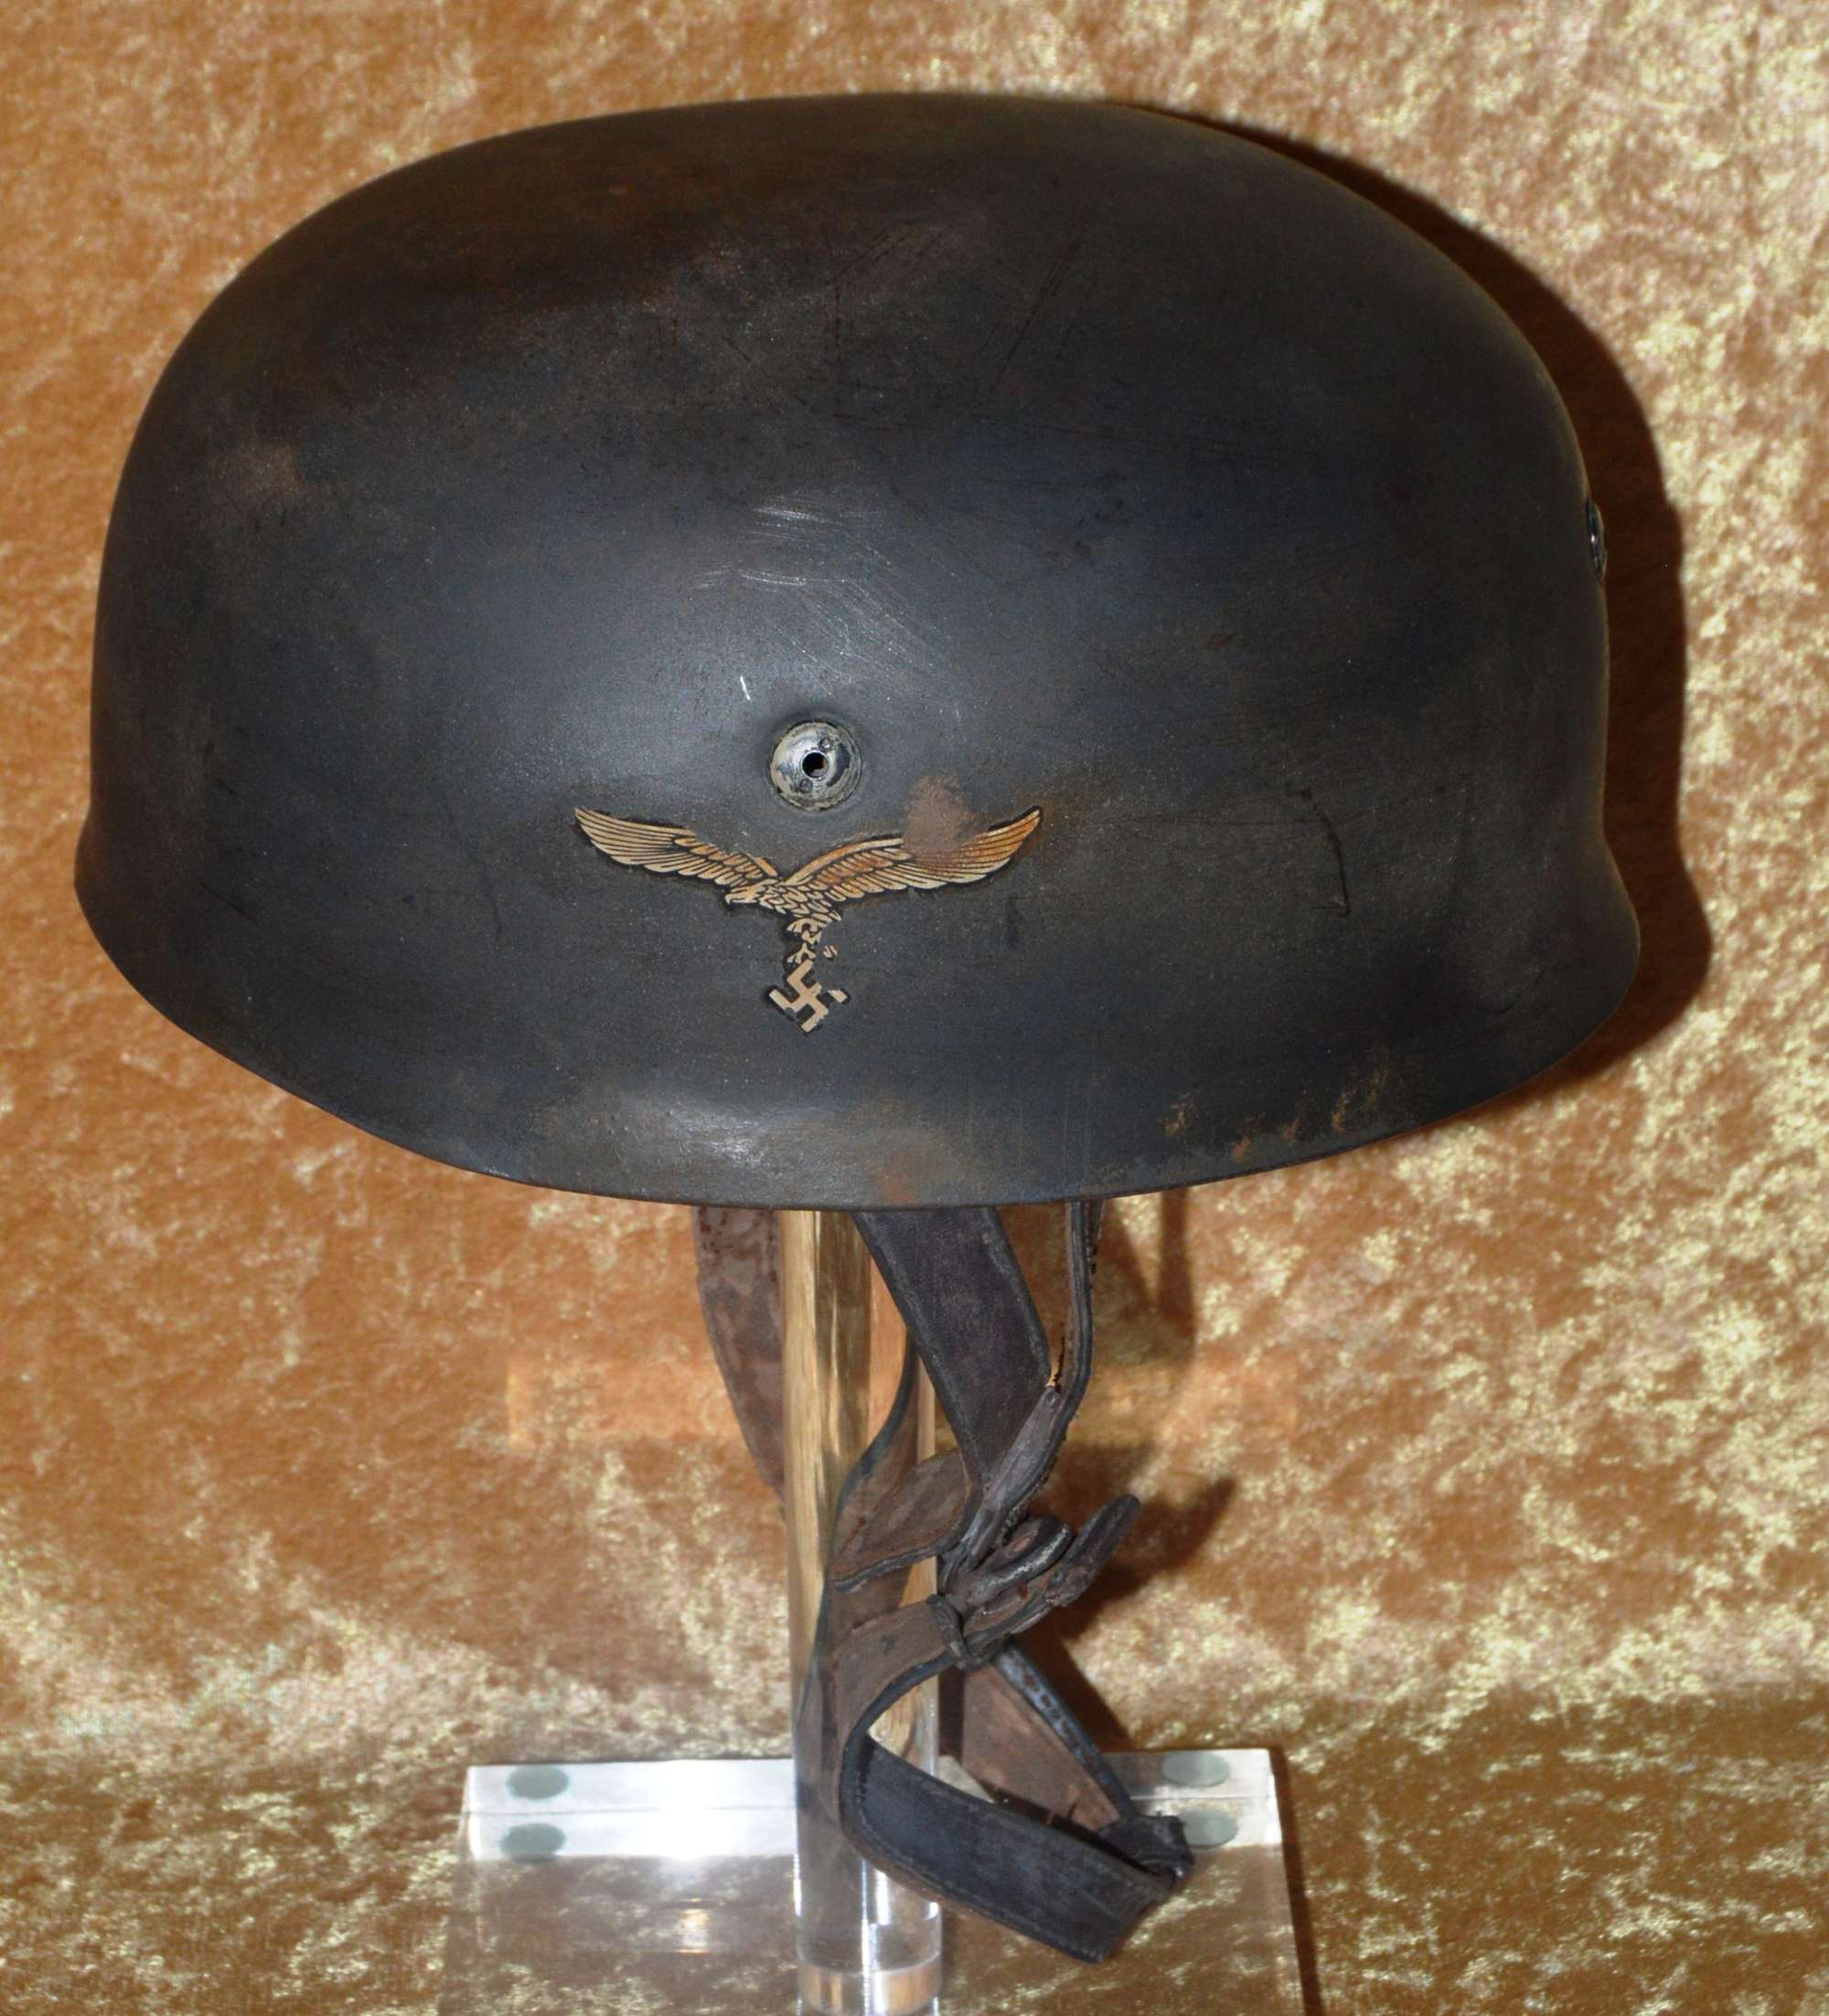 ﻿German M38 Single Decal Luftwaffe Paratrooper Helmet , with Liner and Cover